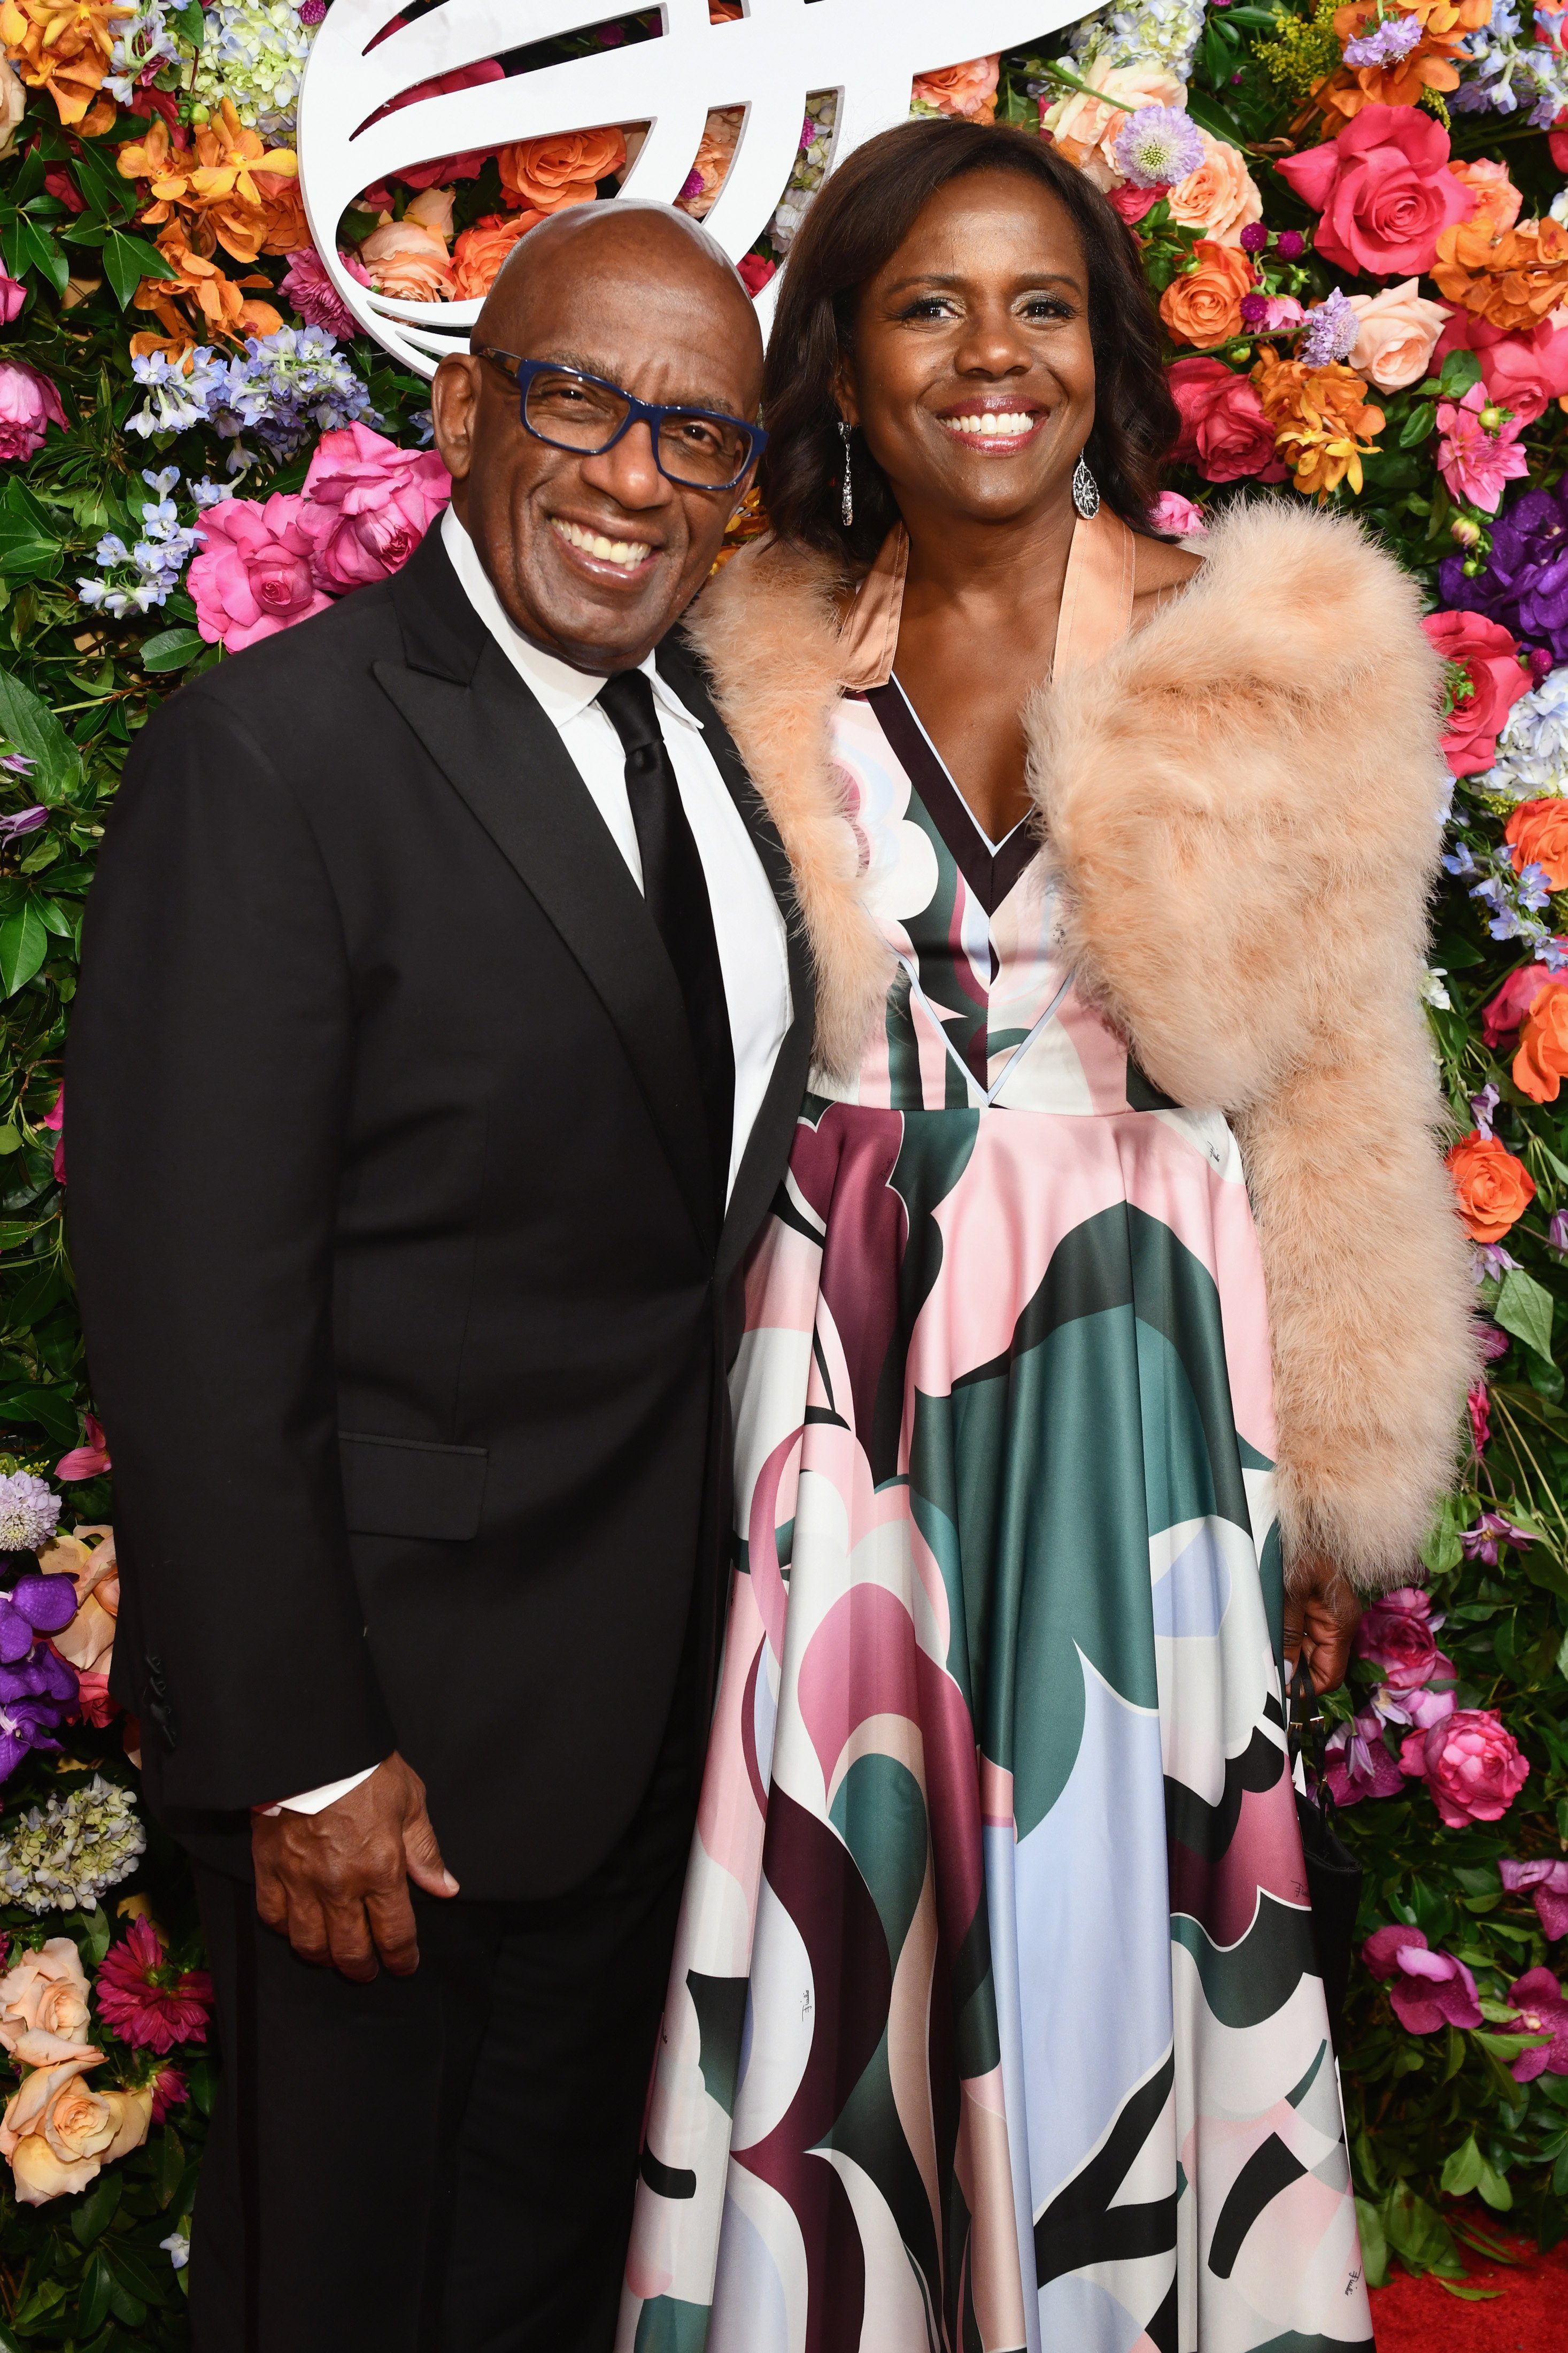 Al Roker and Deborah Roberts attend the American Theatre Wing Centennial Gala at Cipriani 42nd Street on September 24, 2018 in New York City | Source: Getty Images.